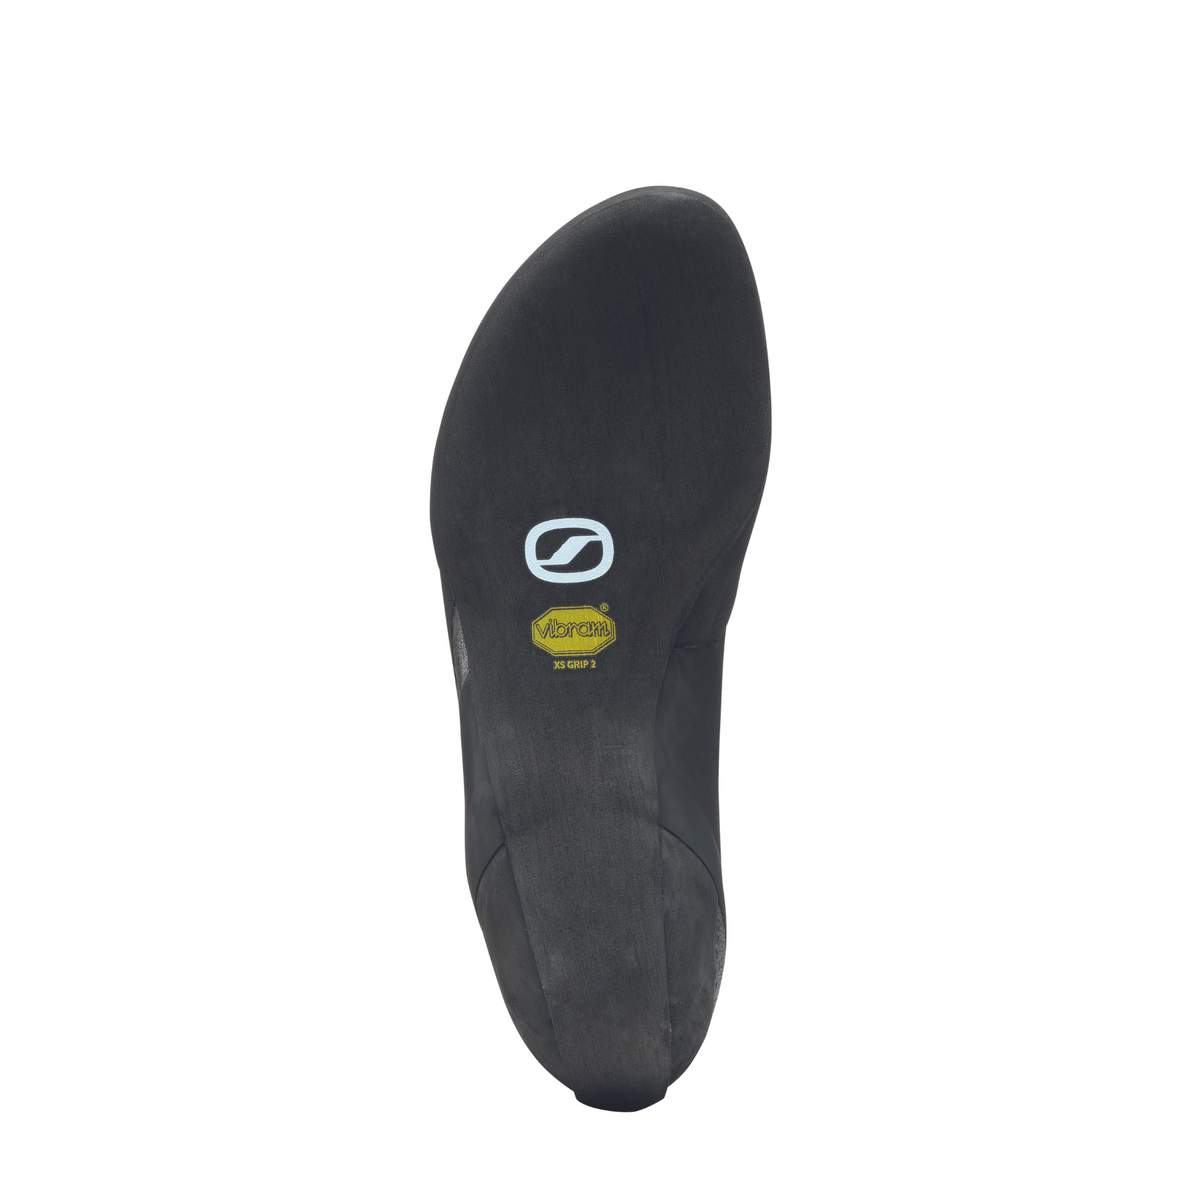 Scarpa Vapour S in smoke-grey with yellow trim. image showing sole unit shape